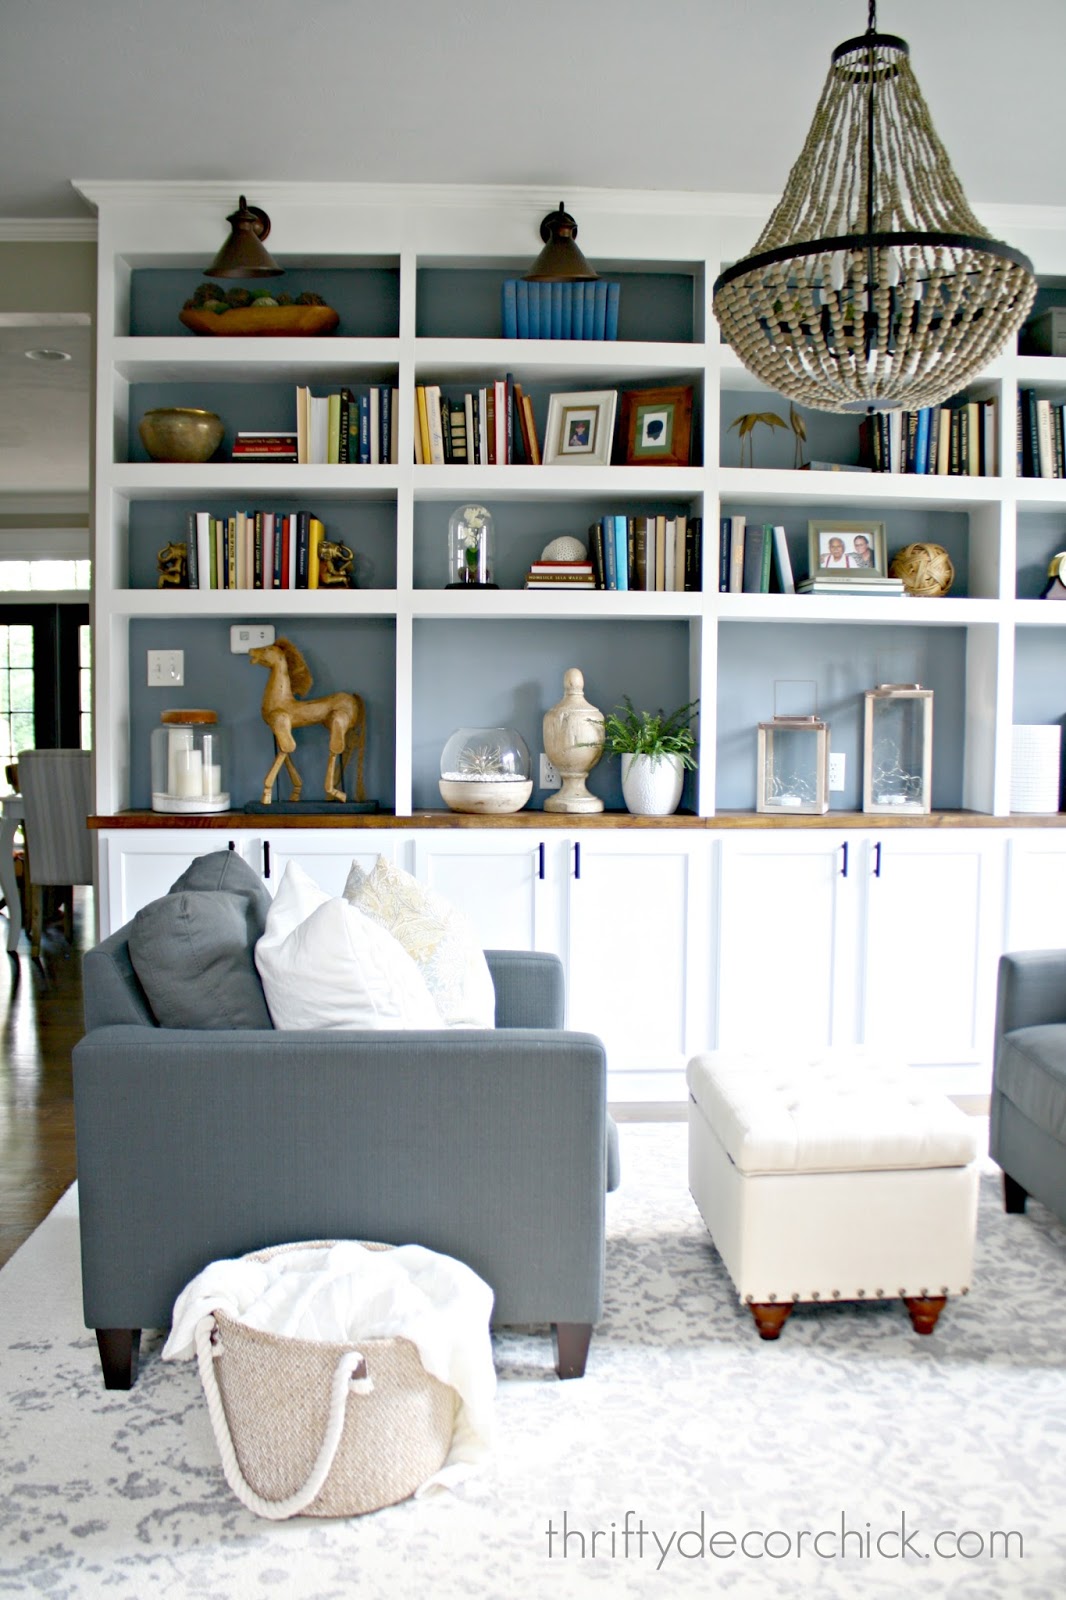 Simplifying the library shelves from Thrifty Decor Chick